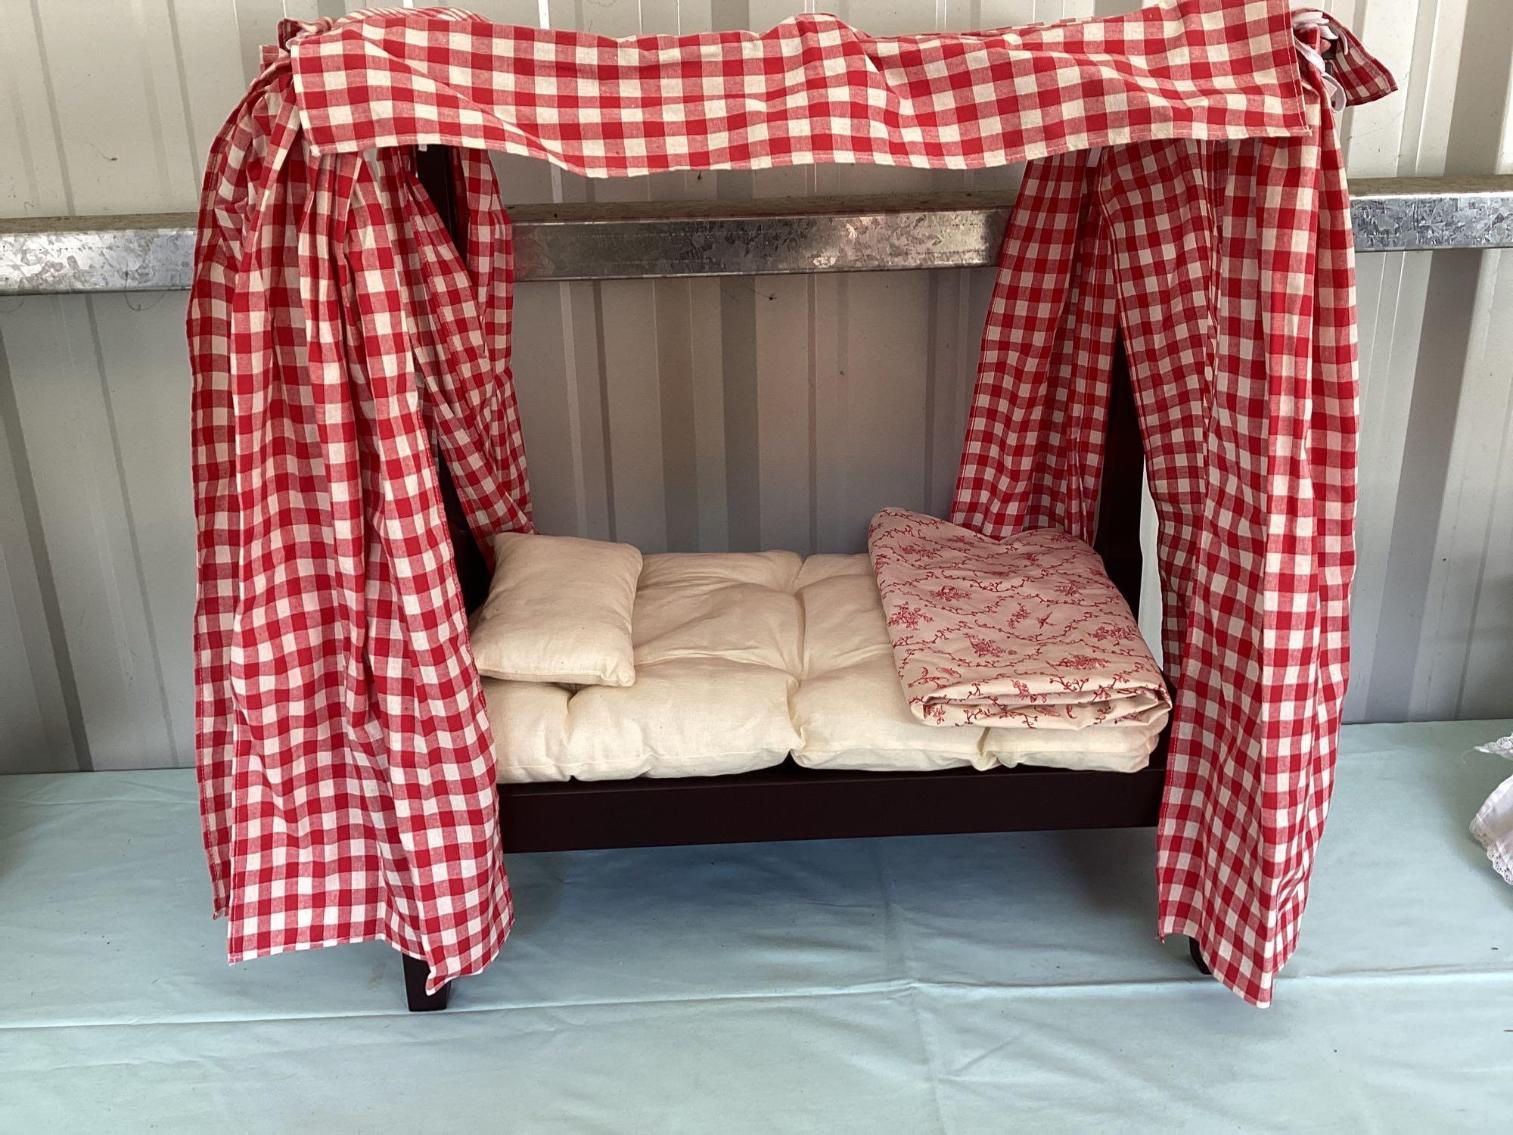 Image for American Girl Doll Bed